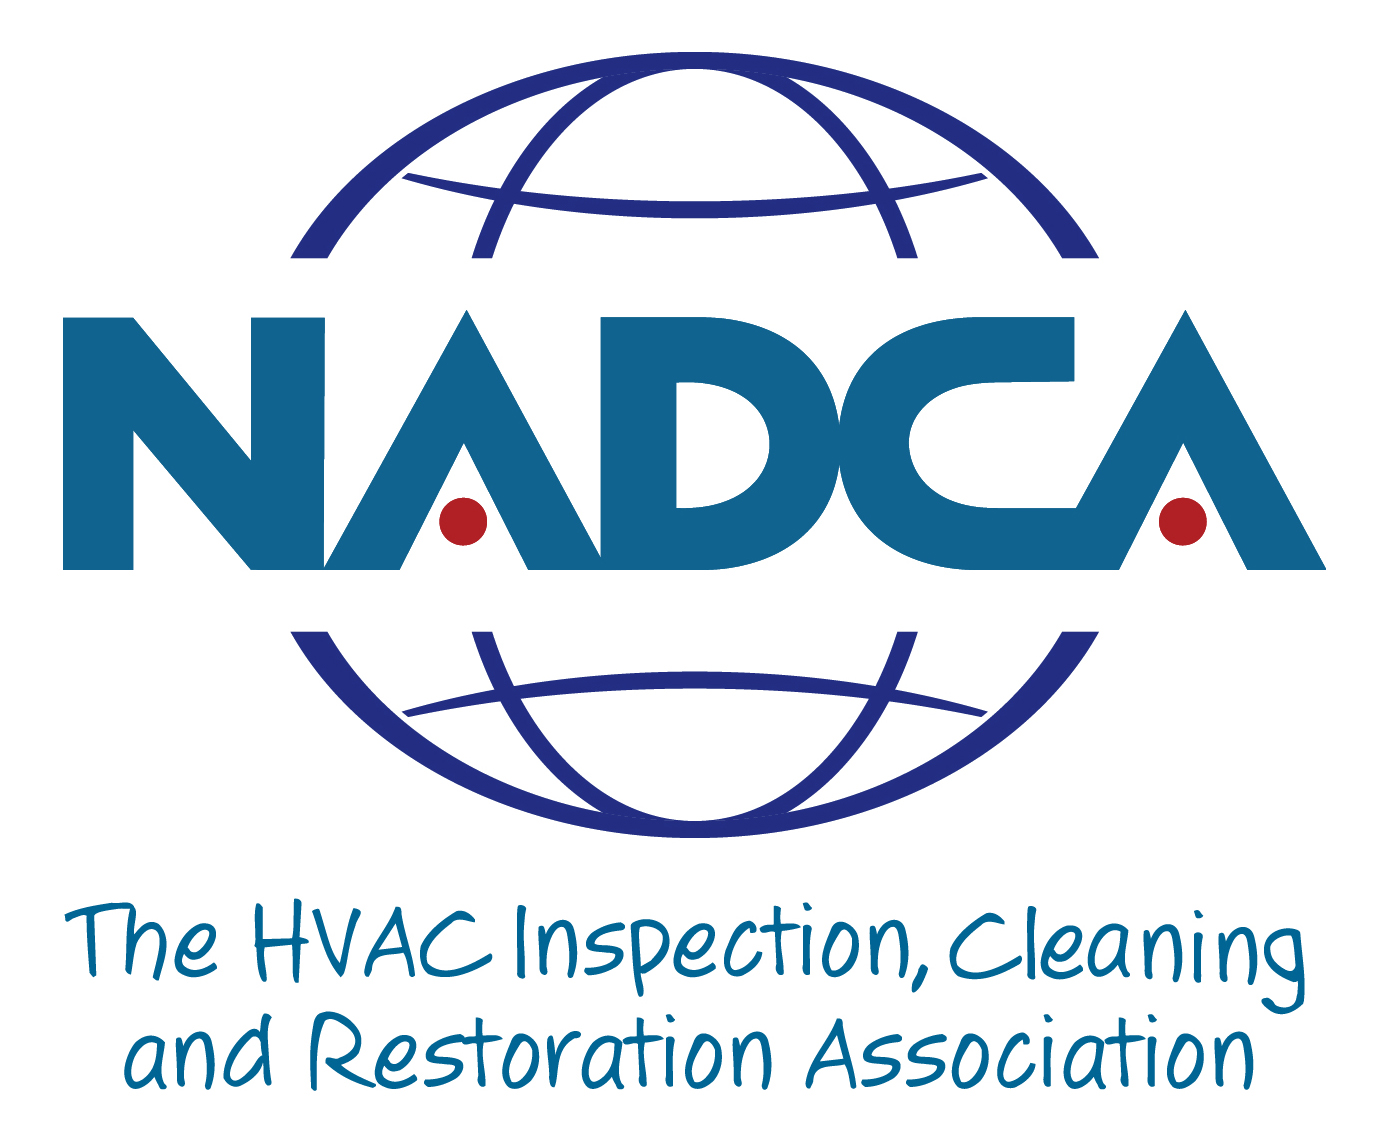 Logo of the HVAC Inspection, Cleaning and Restoration Association. NADCA